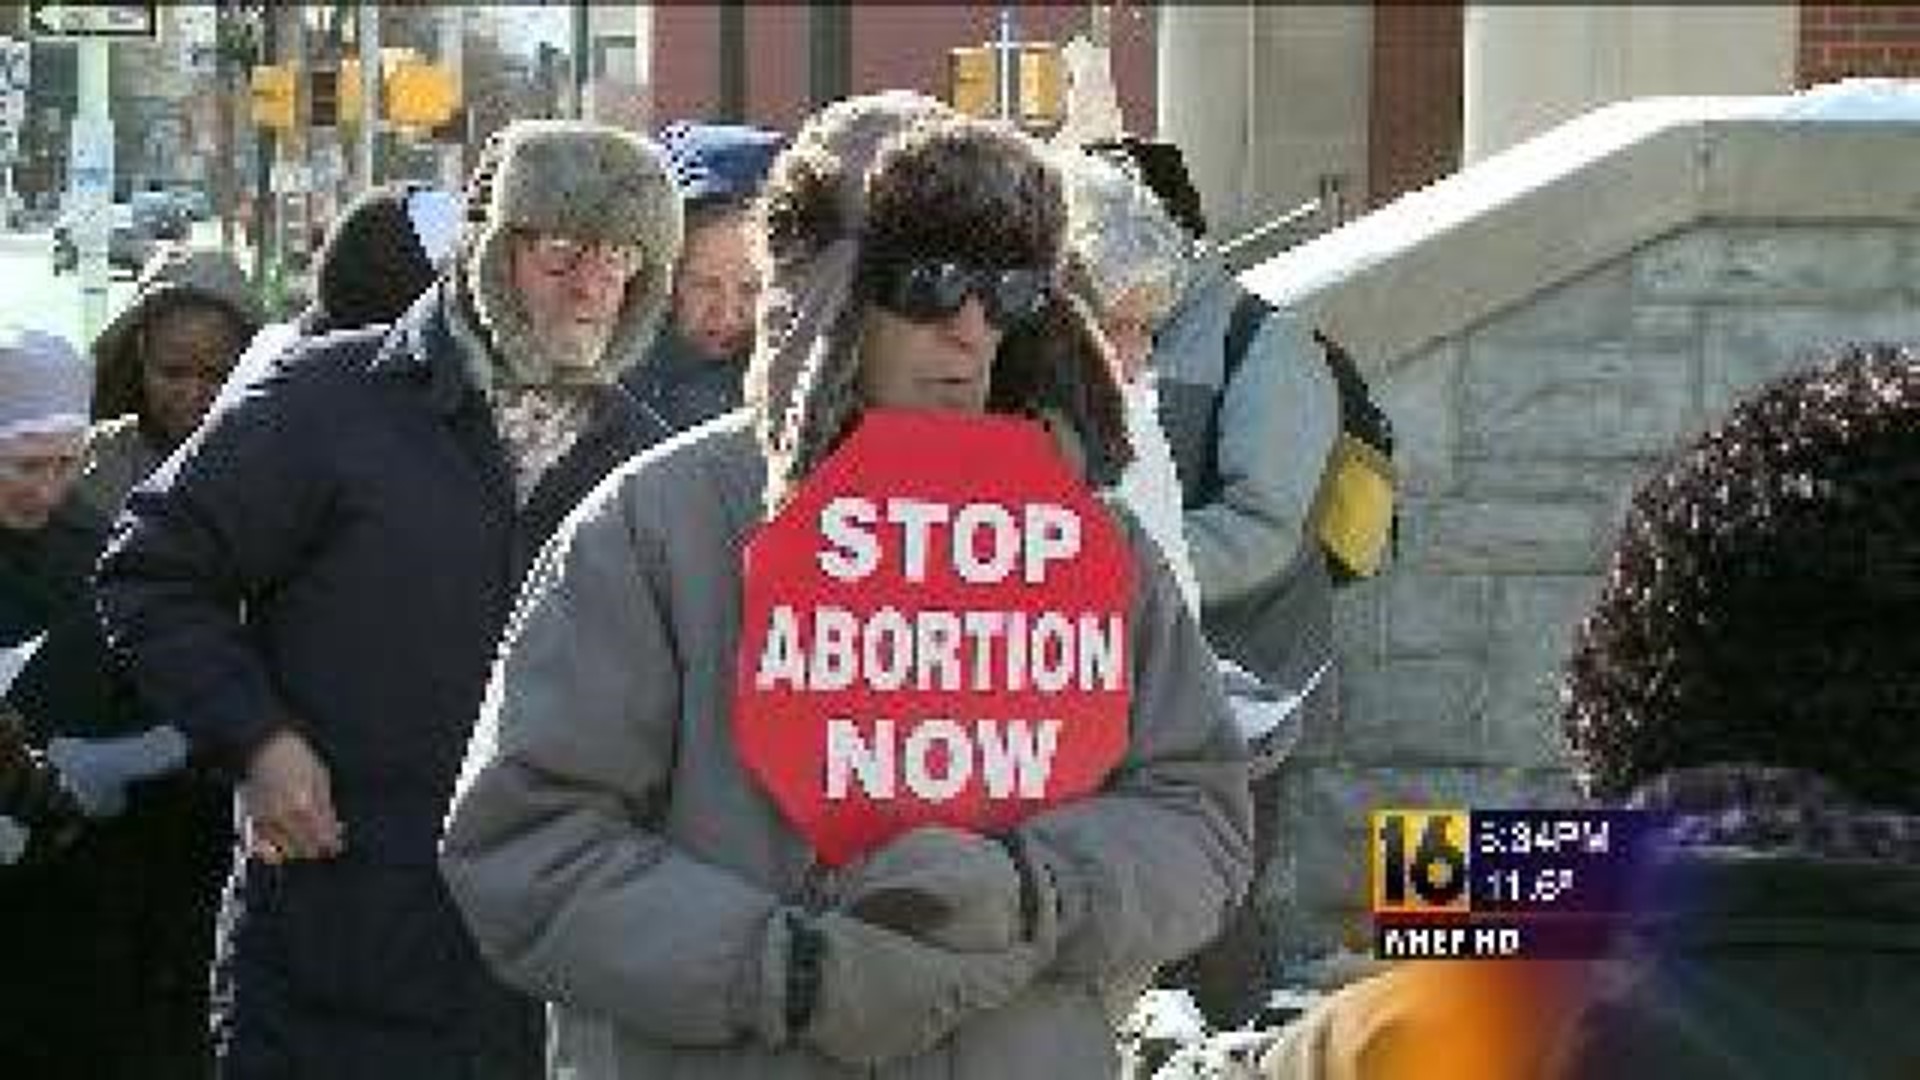 Catholic Rally for Roe v. Wade appeal